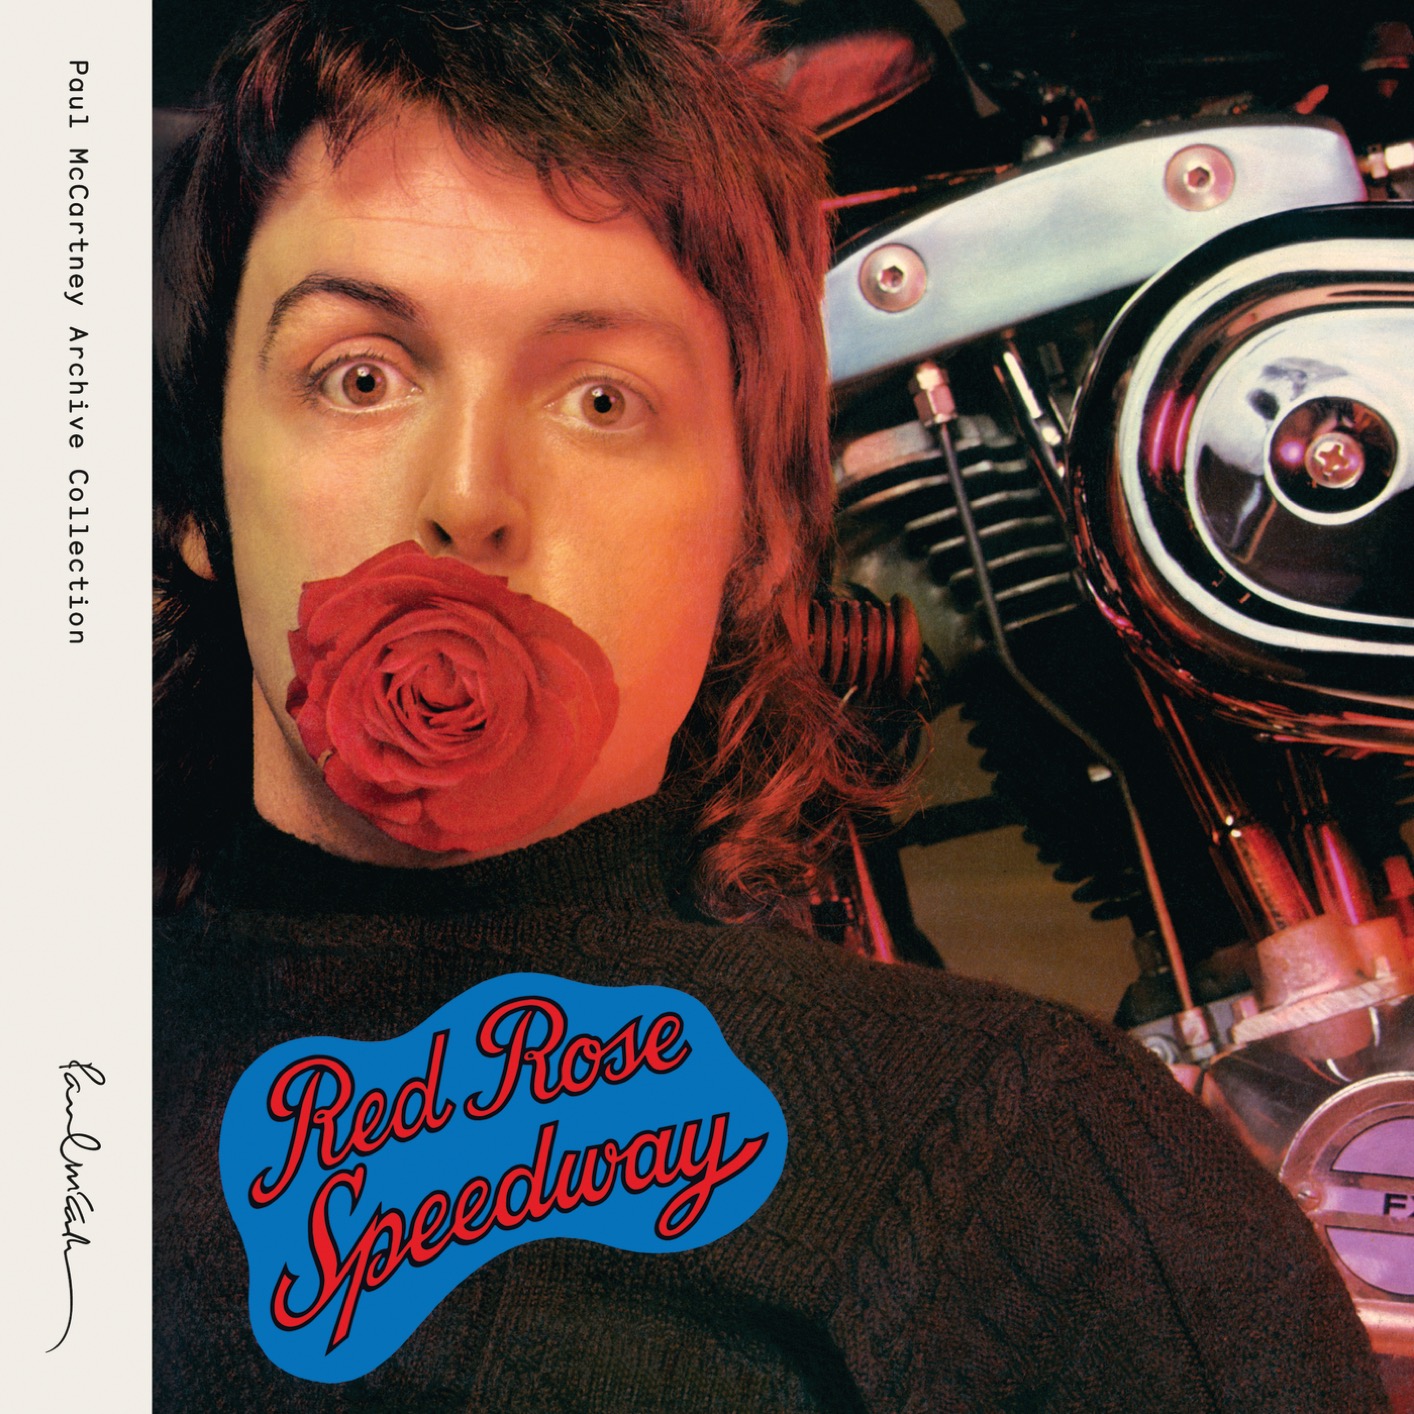 Paul McCartney & Wings – Red Rose Speedway (Special Edition) (1973/2018) [FLAC 24bit/96kHz]